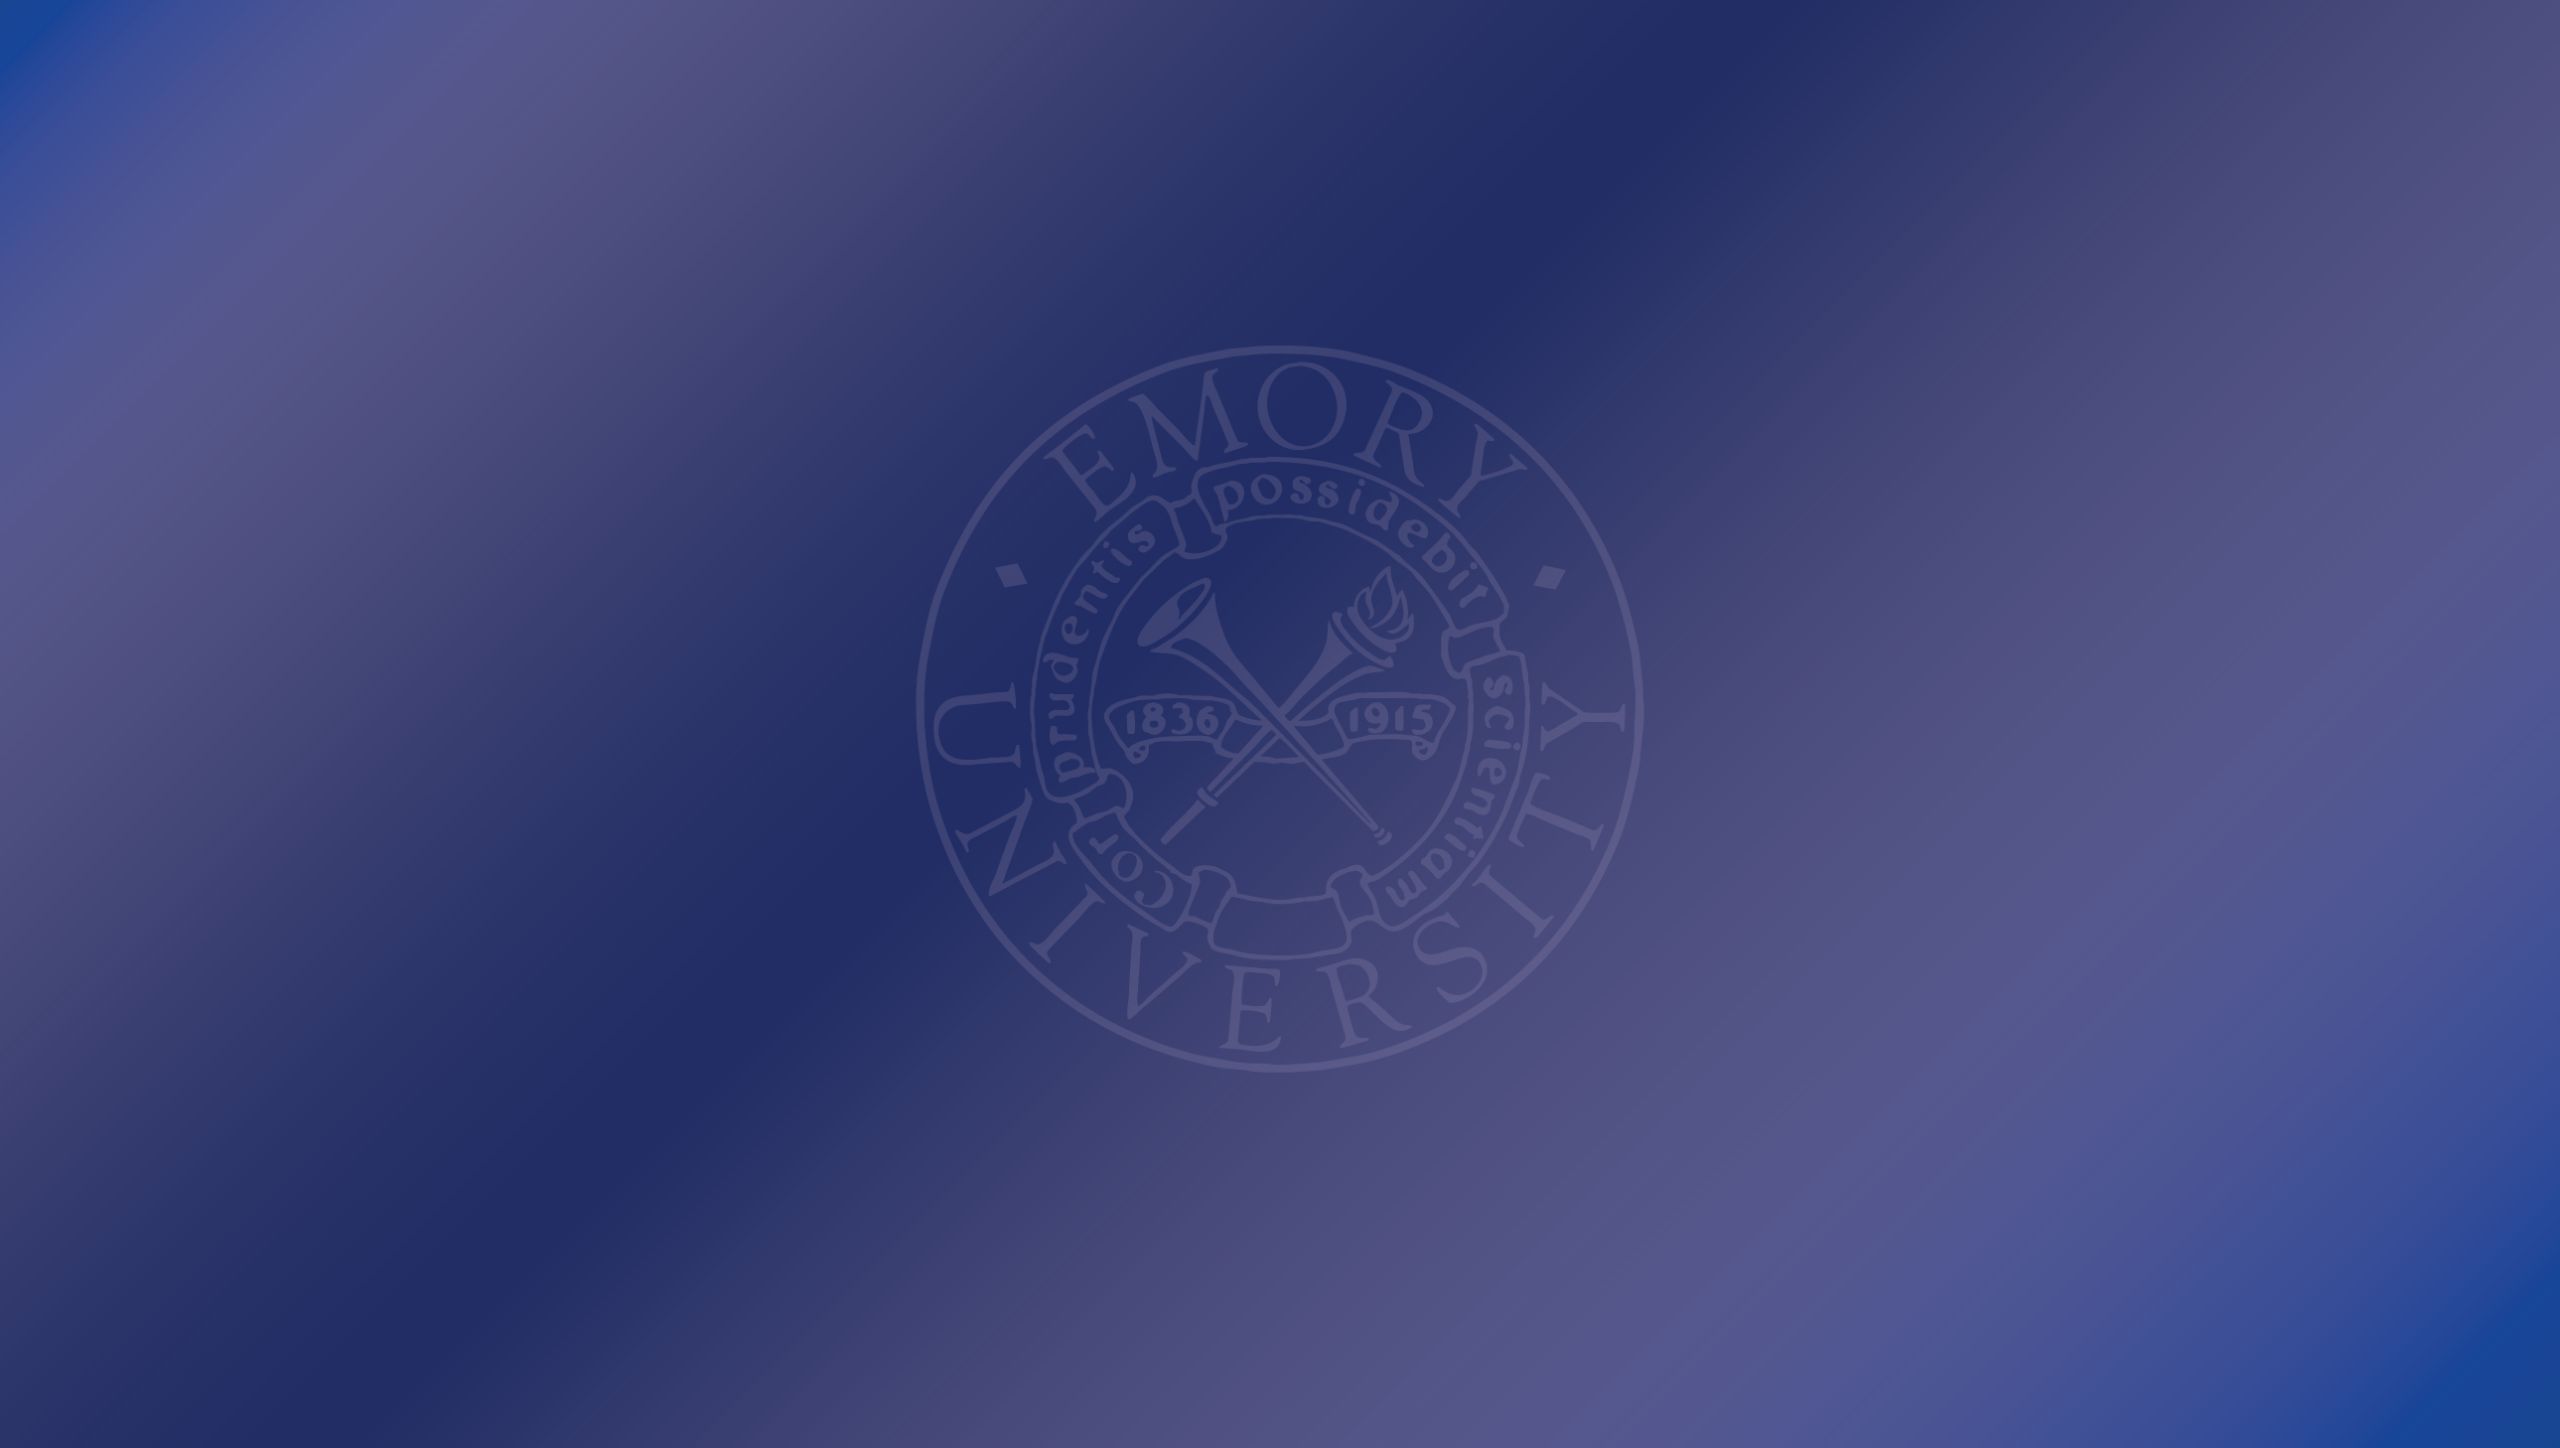 A blue background with the Emory shield